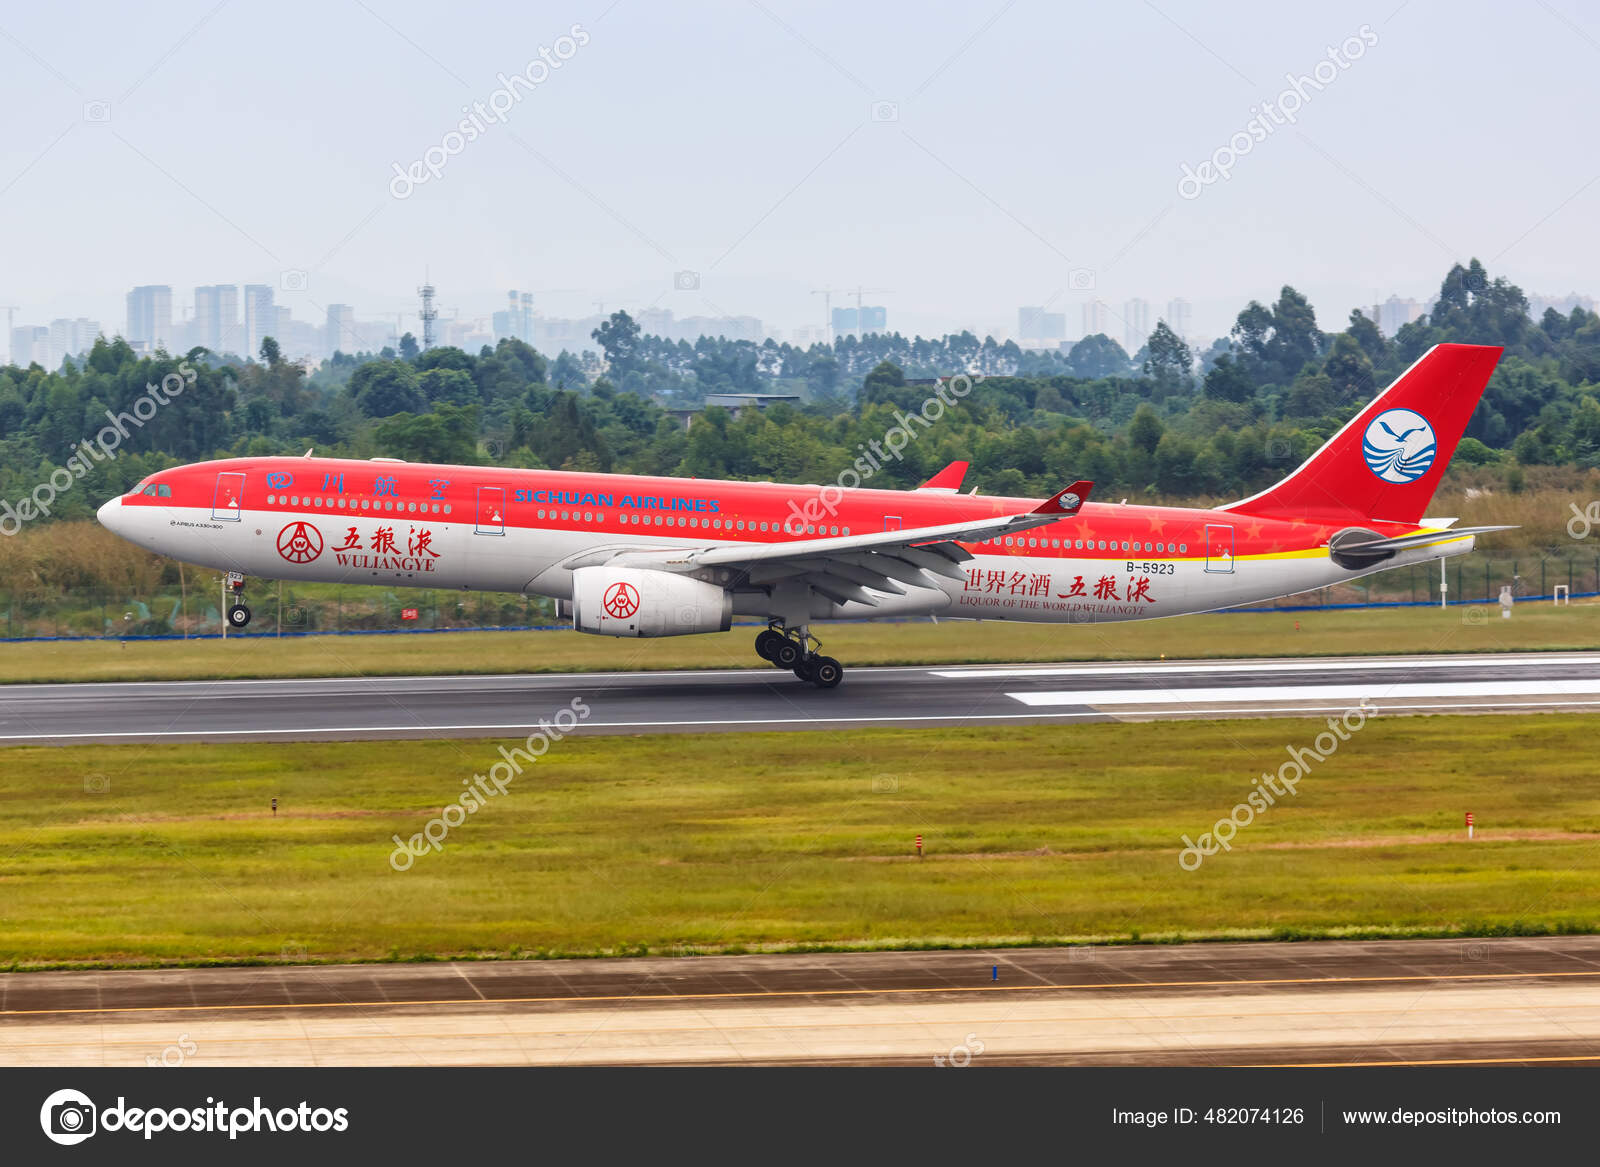 Sichuan airlines Pictures, Sichuan airlines Stock Photos & Images |  Depositphotos®